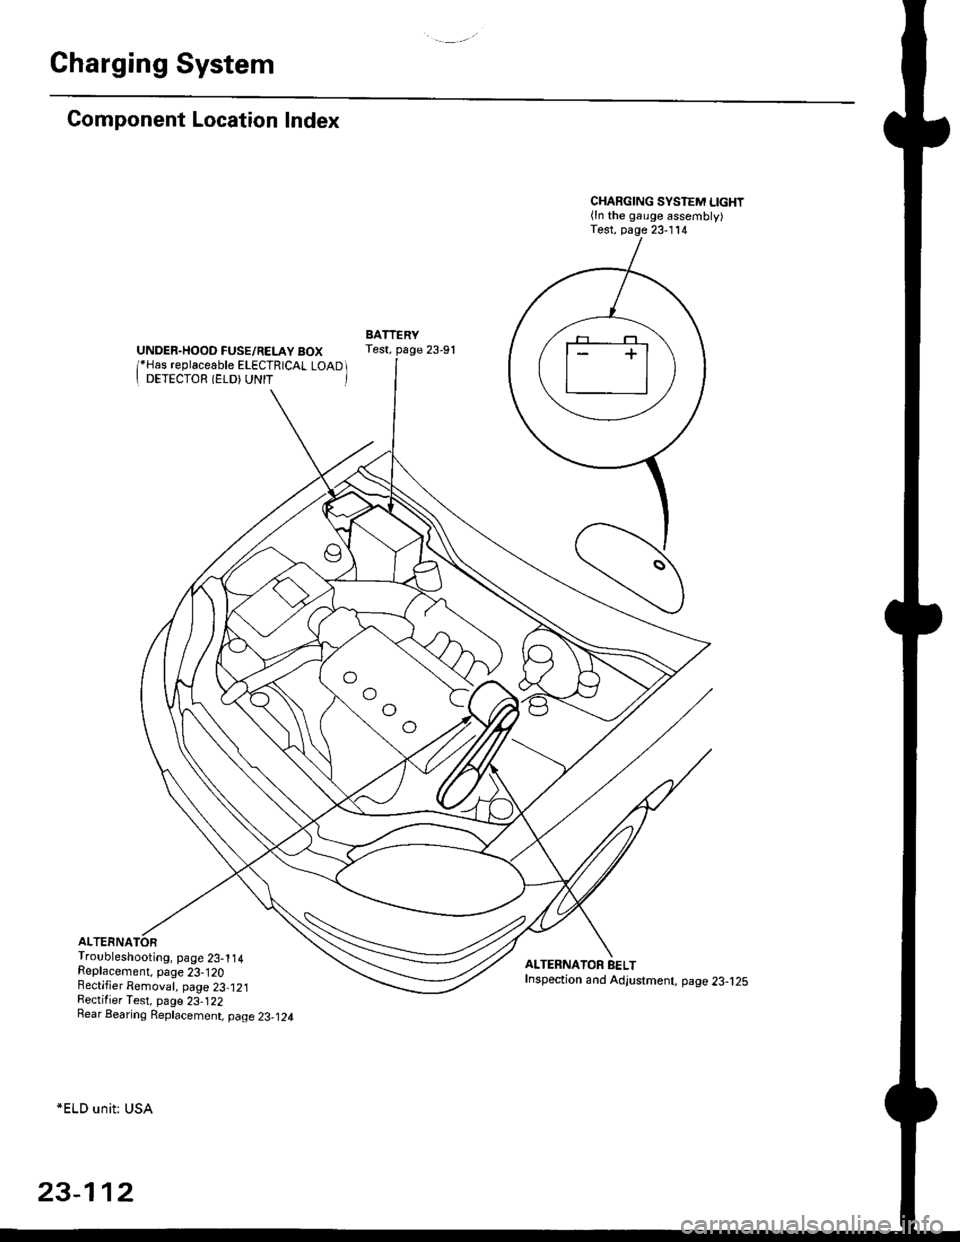 HONDA CIVIC 1999 6.G Workshop Manual Charging System
Component Location Index
UNDER.HOOD FUSE/RELAY BOX/*Has replaceable ELECTRICAL LOAD II DETECTOR (ELD) UNIT 
Troubleshooting, page 23-1 14Replacement, page 23-120Bectifier Removal, pag